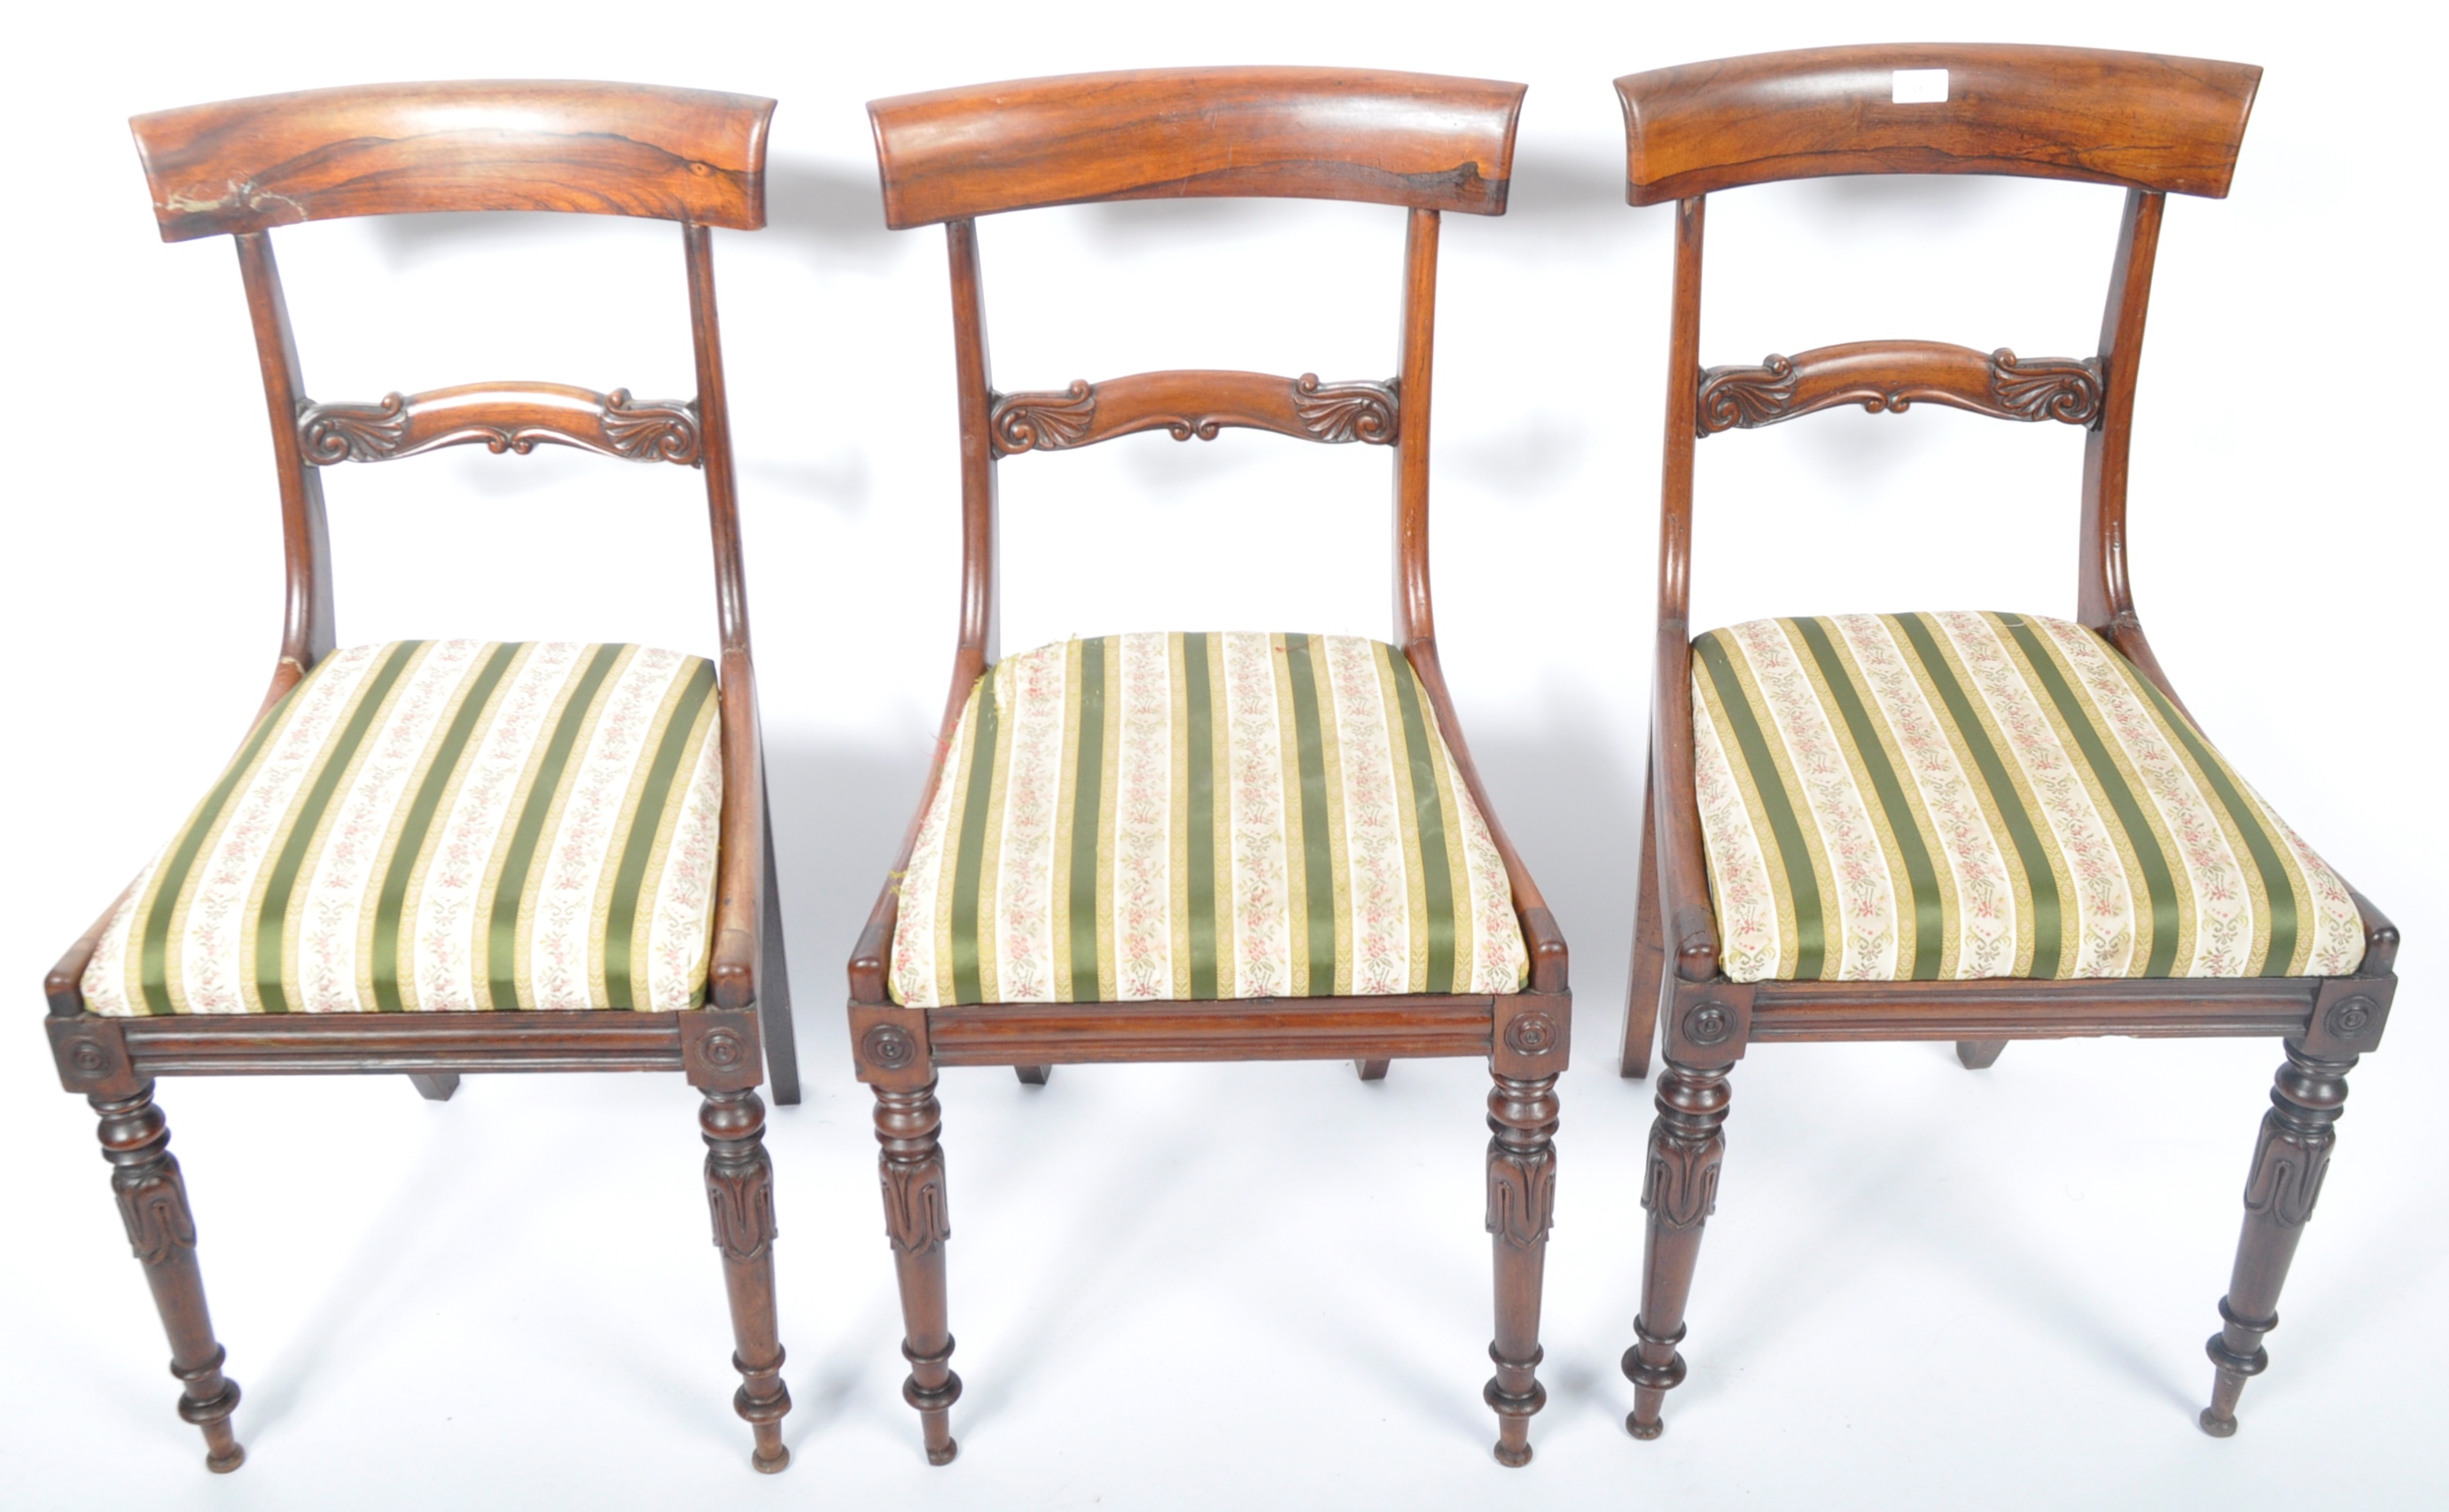 SET OF SIX ANTIQUE ROSEWOOD DINING CHAIRS IN THE GILLOWS STYLE - Image 6 of 12